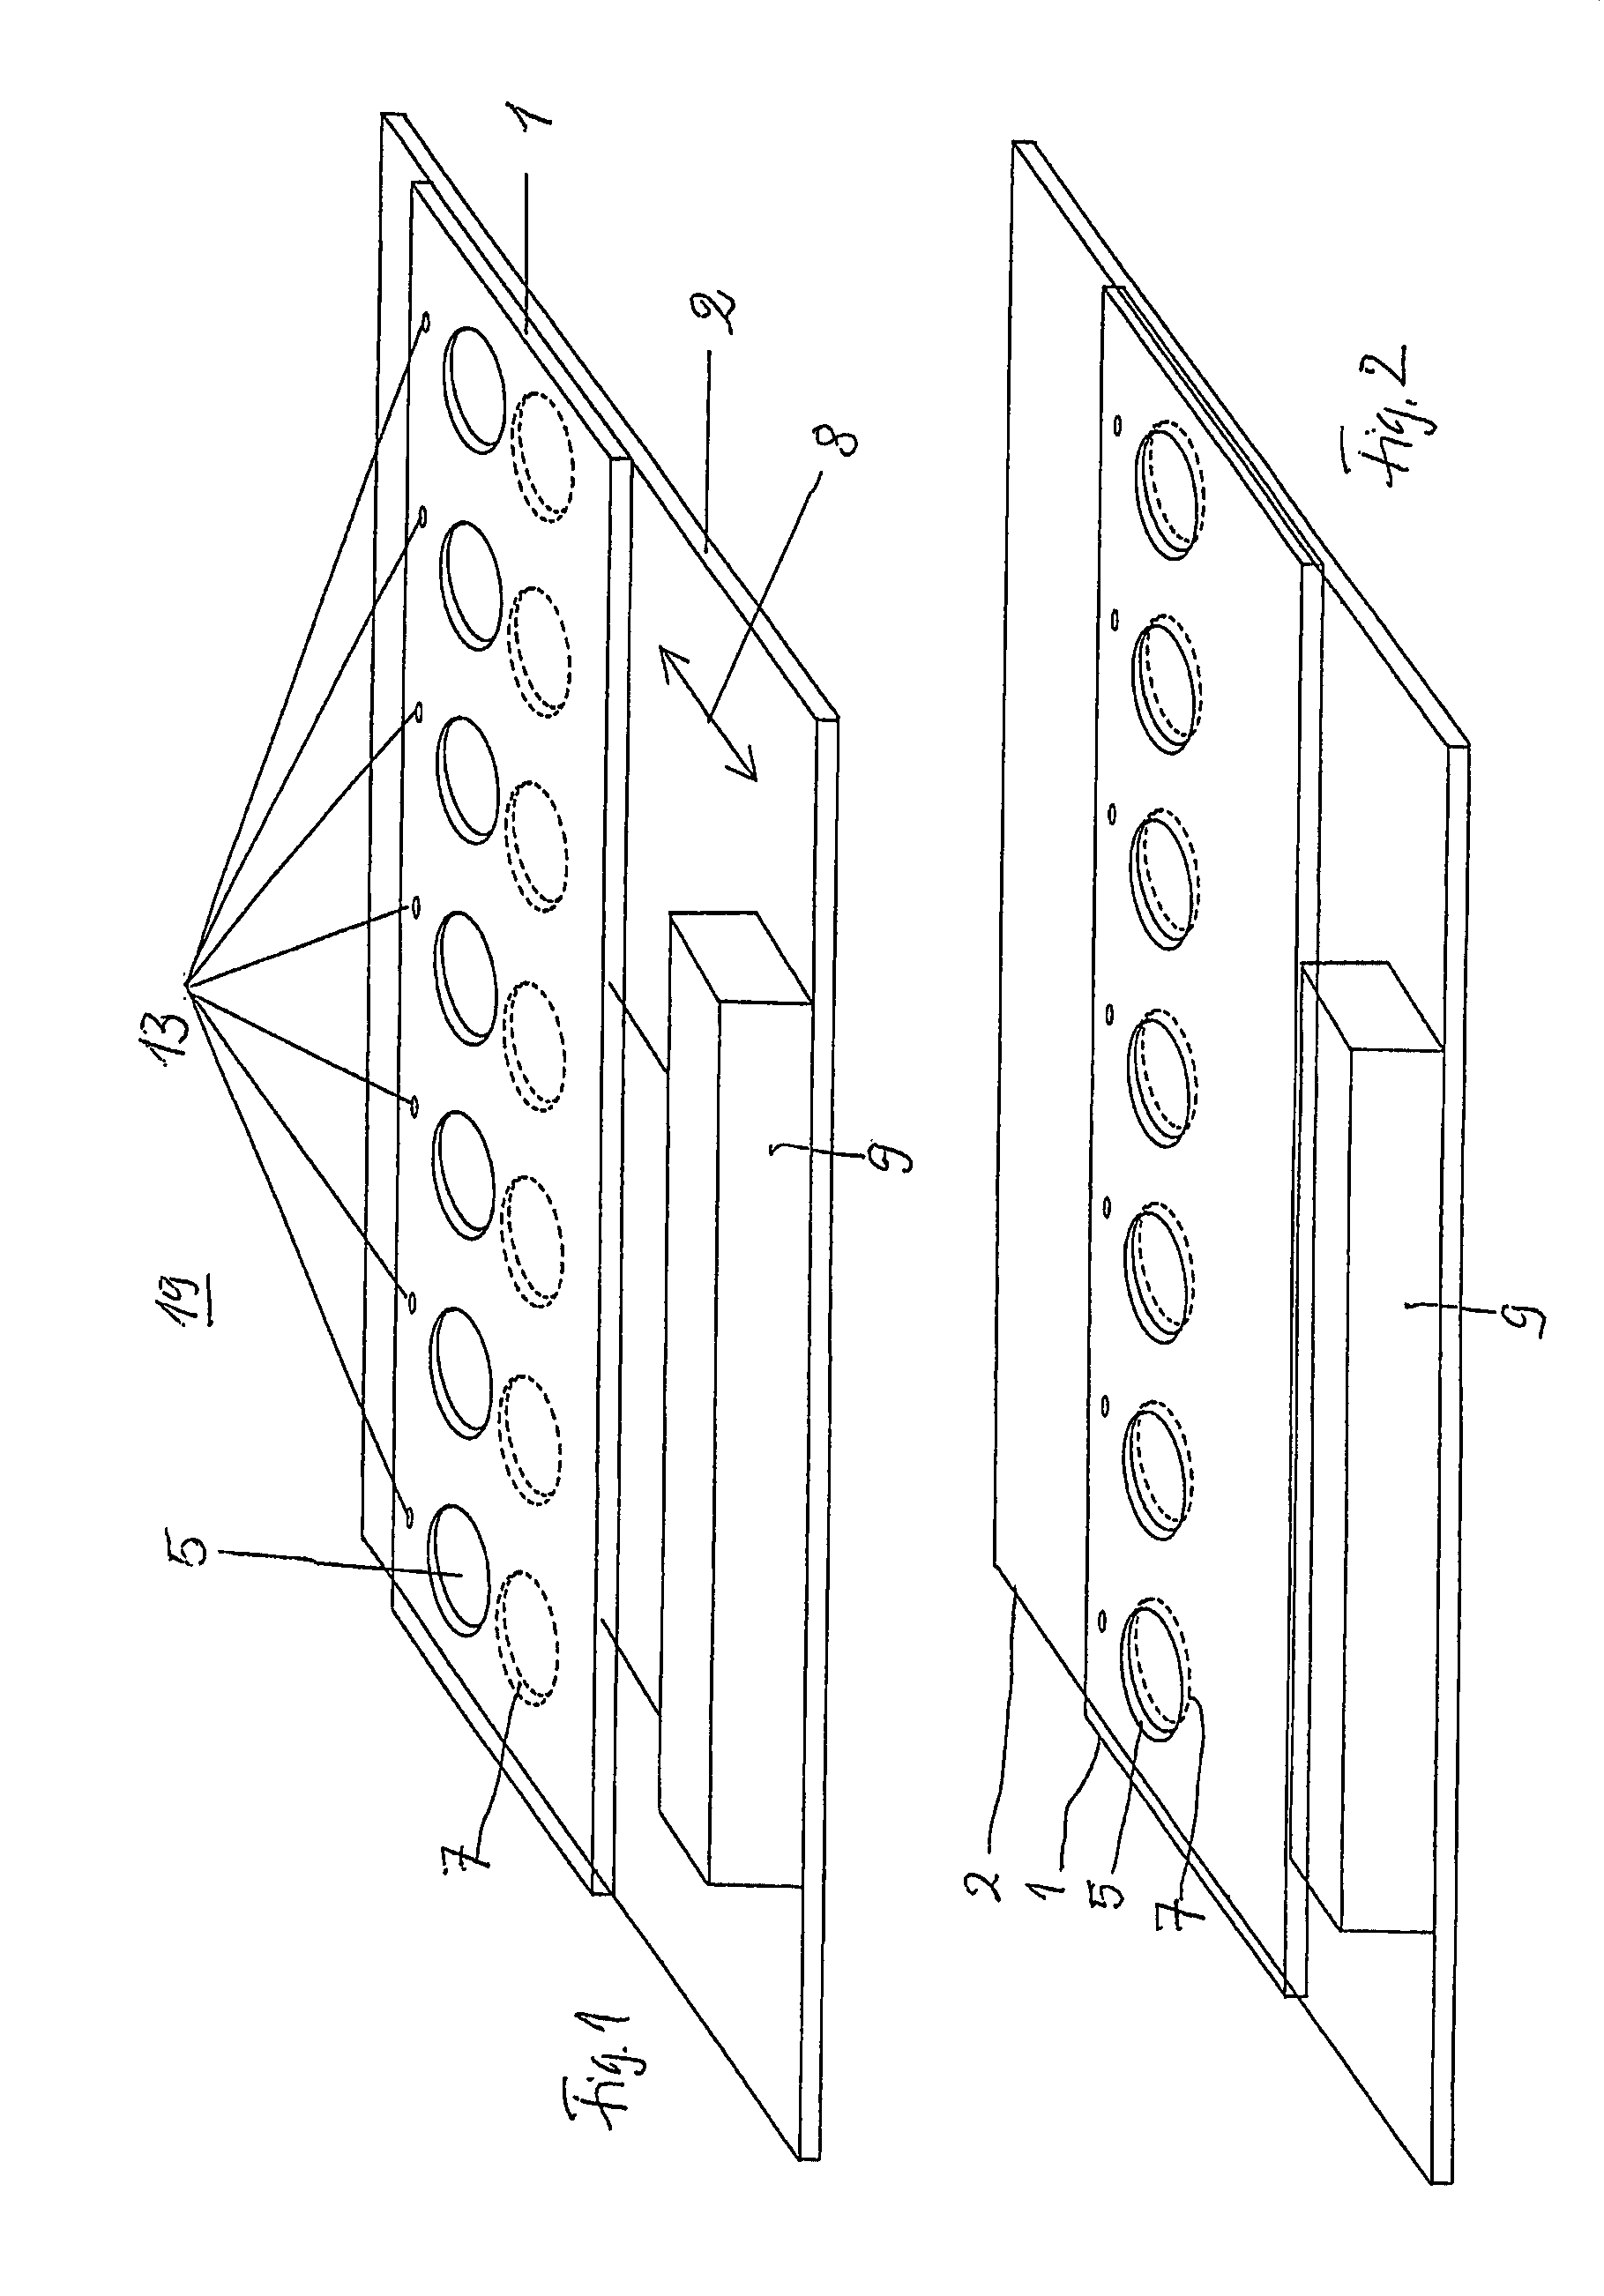 Device for individual packing of tablets according to a multi-dose system